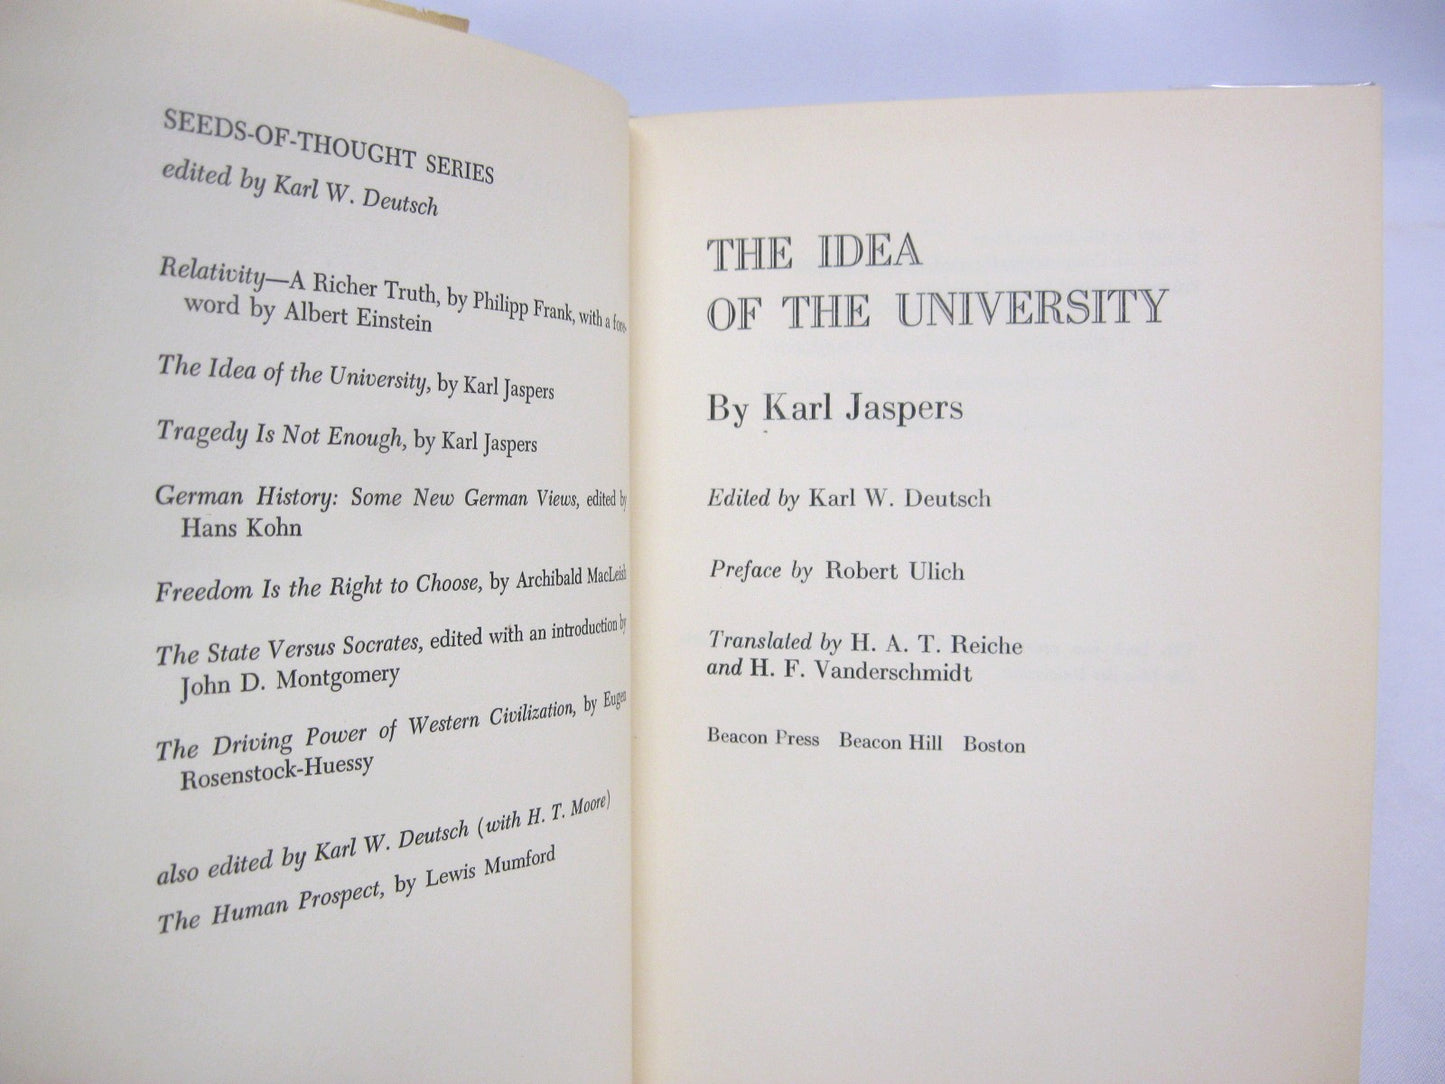 The Idea of a University by Karl Jaspers